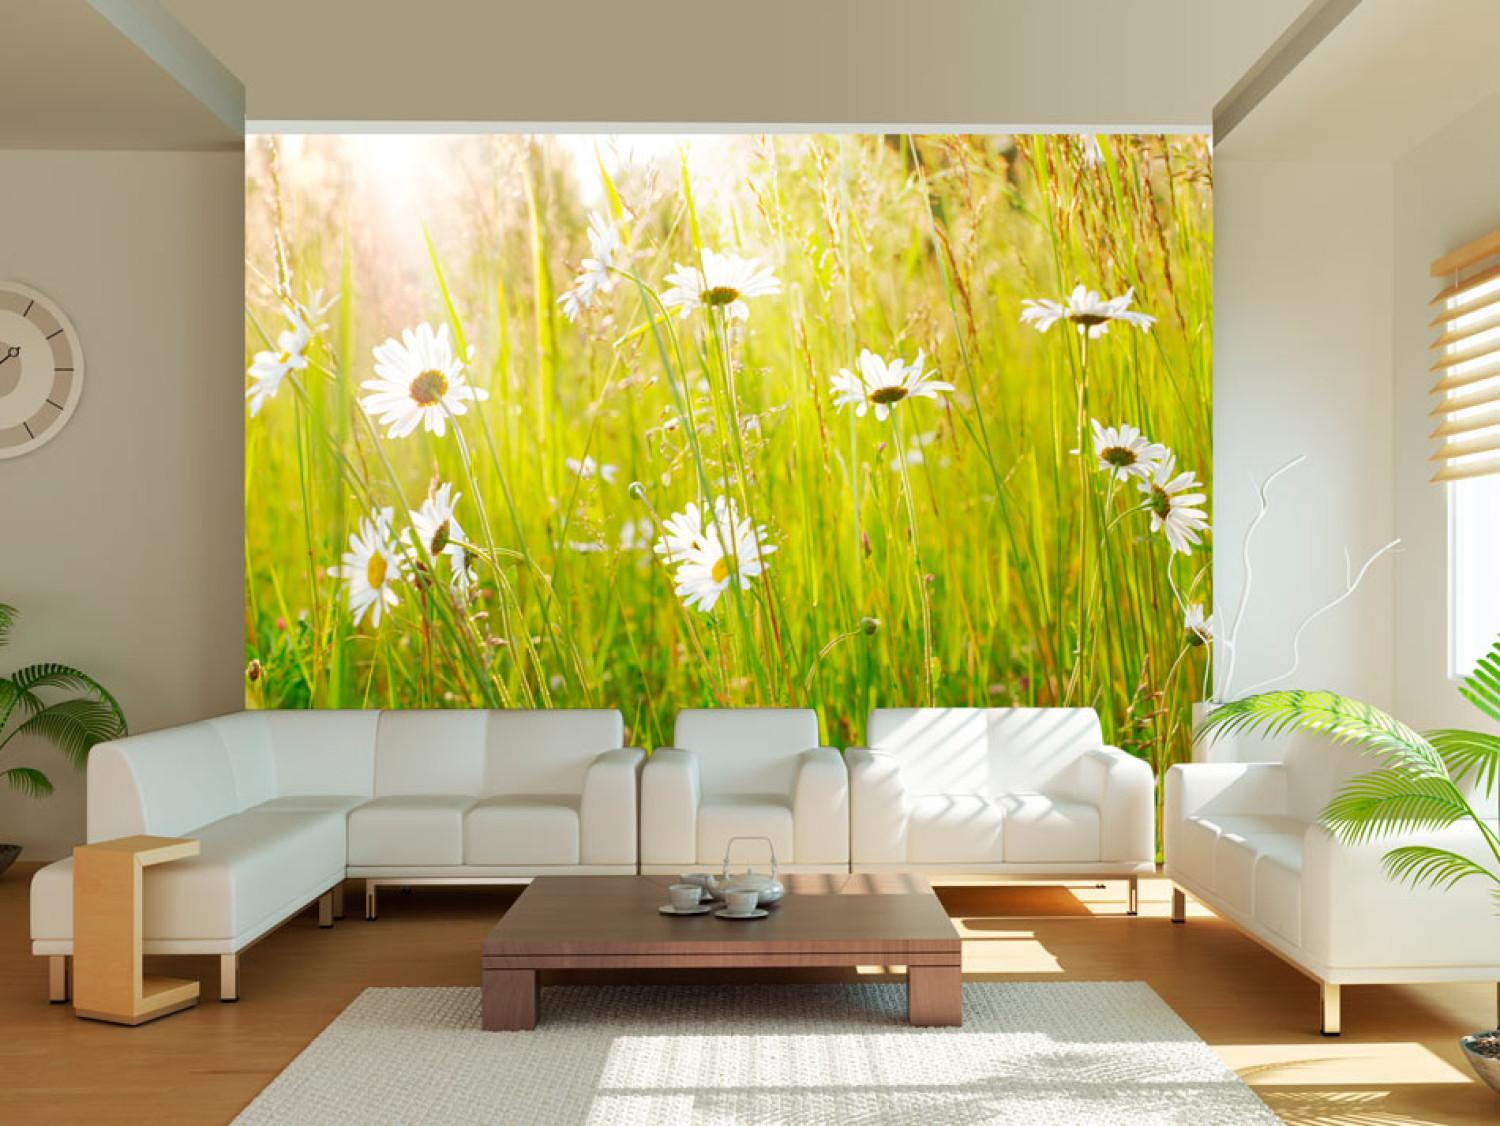 Wall Mural Field of Daisies - Sunny Landscape of a Flower-Filled Meadow with Grass